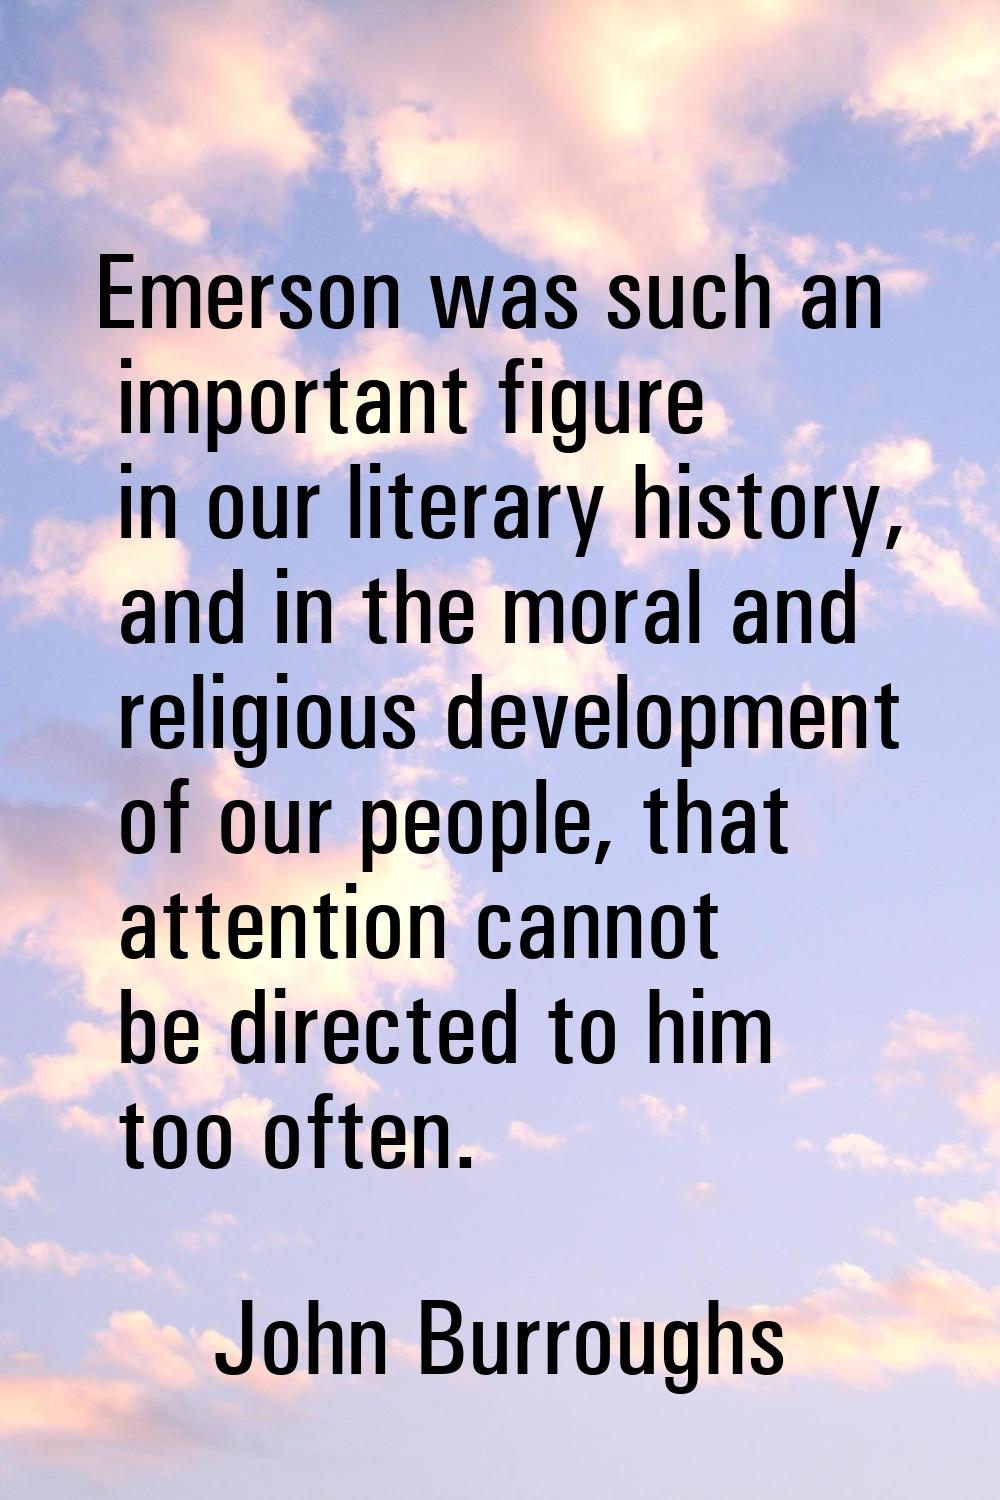 Emerson was such an important figure in our literary history, and in the moral and religious develo